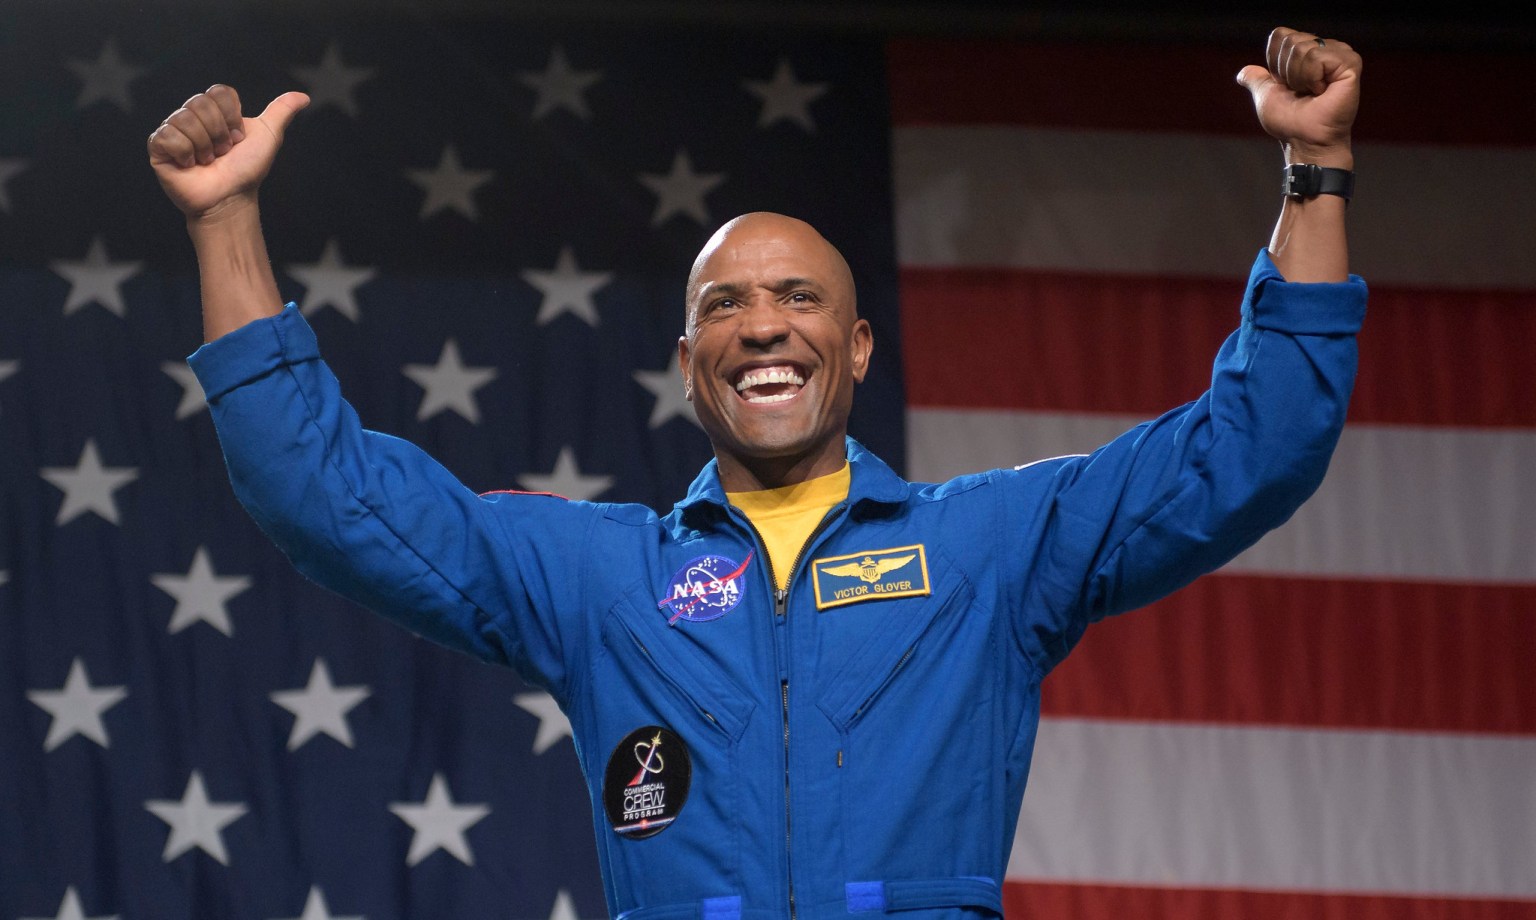 NASA astronaut Victor Glover is seen during a NASA event where it was announced that he, and NASA astronaut Mike Hopkins are assigned to the first mission to the International Space Station onboard SpaceX’s Crew Dragon